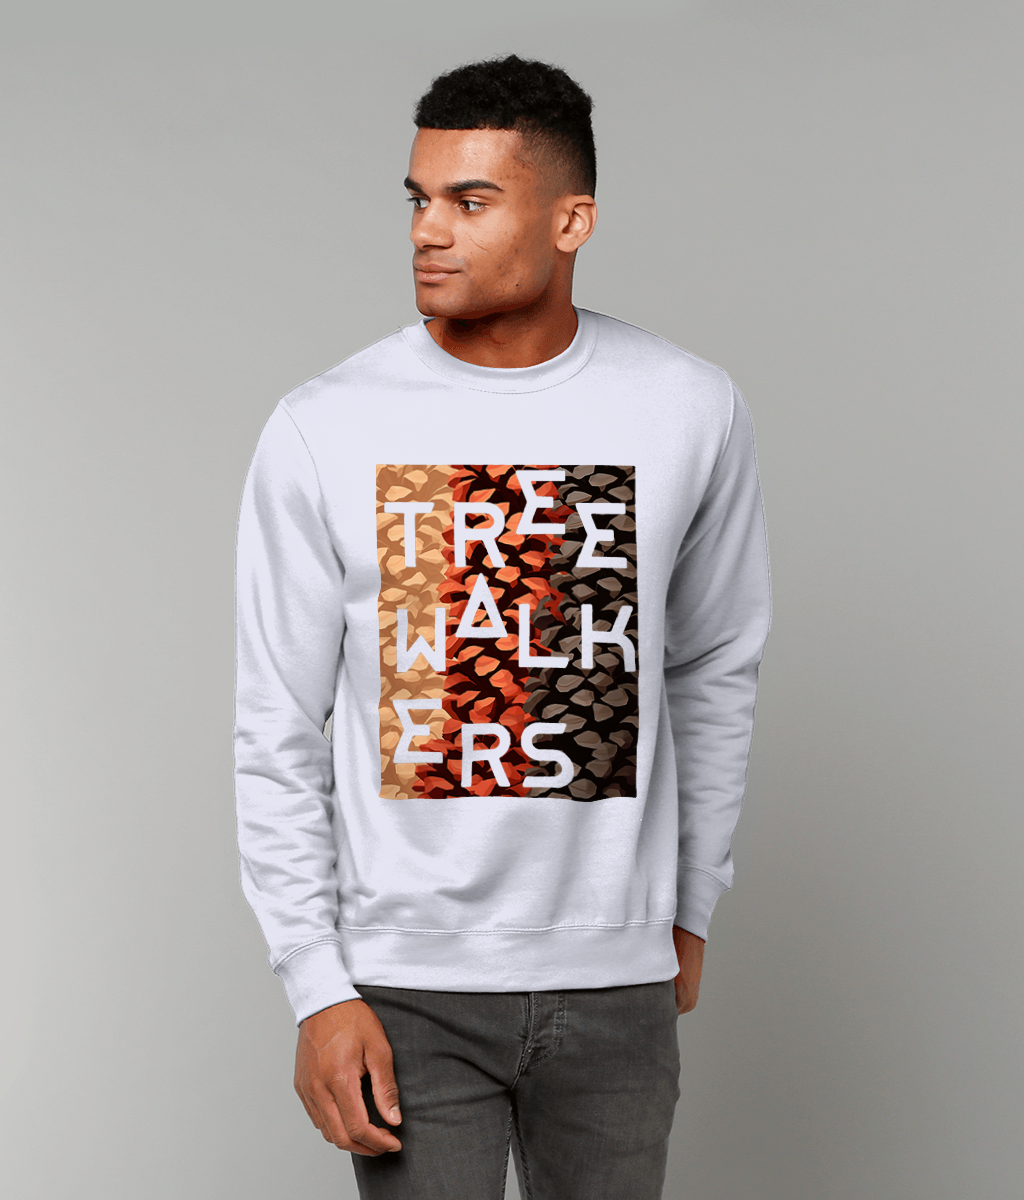 Treewalkers Tricolor Pinecone Graphic Sweater